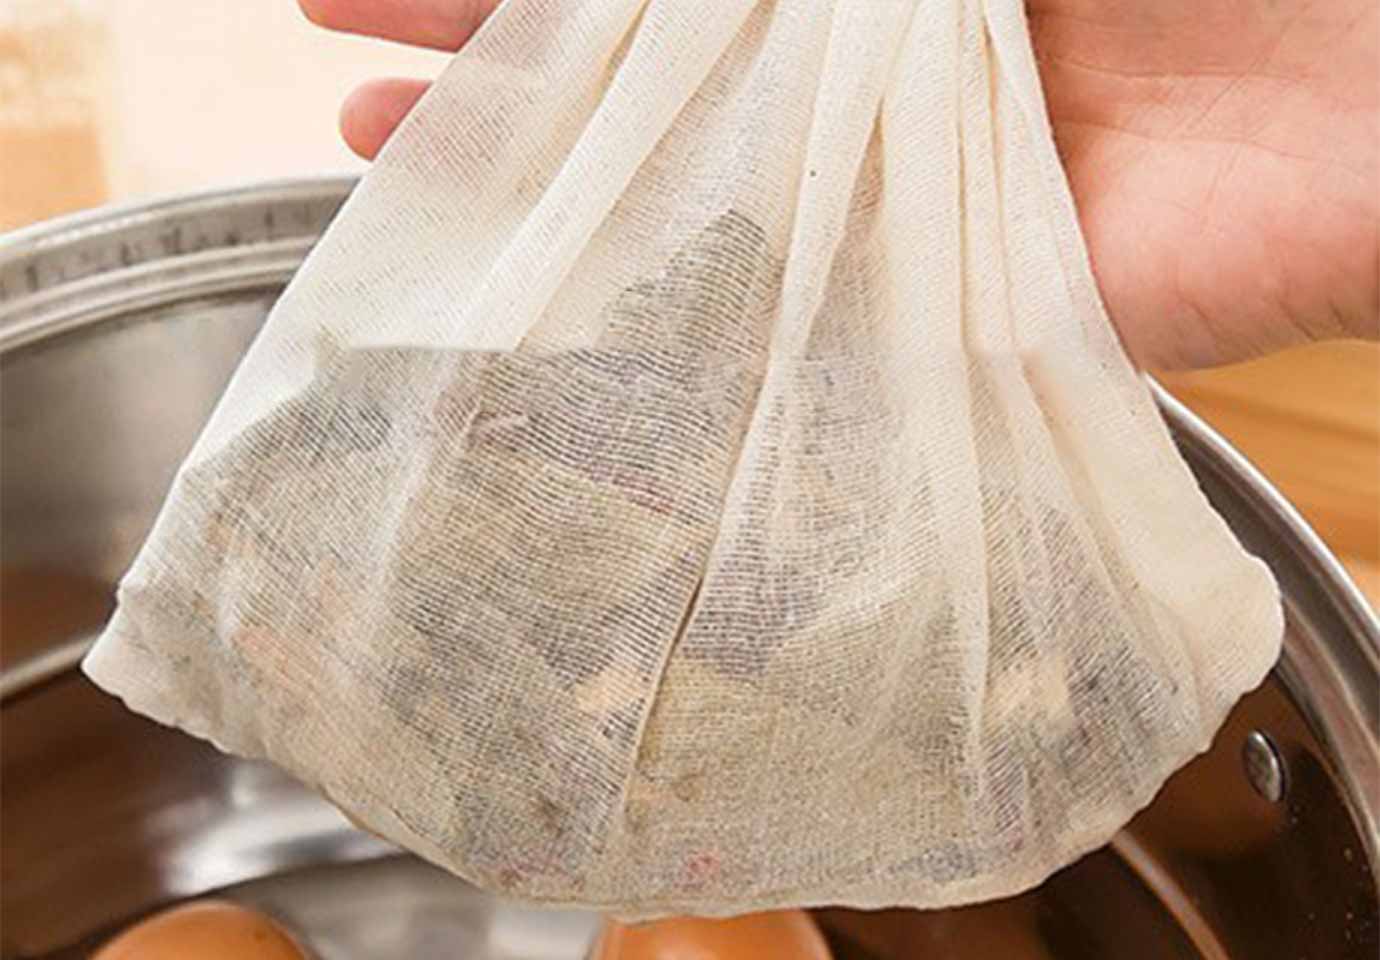 Woven Draw String Tea Bags - 100 Pack